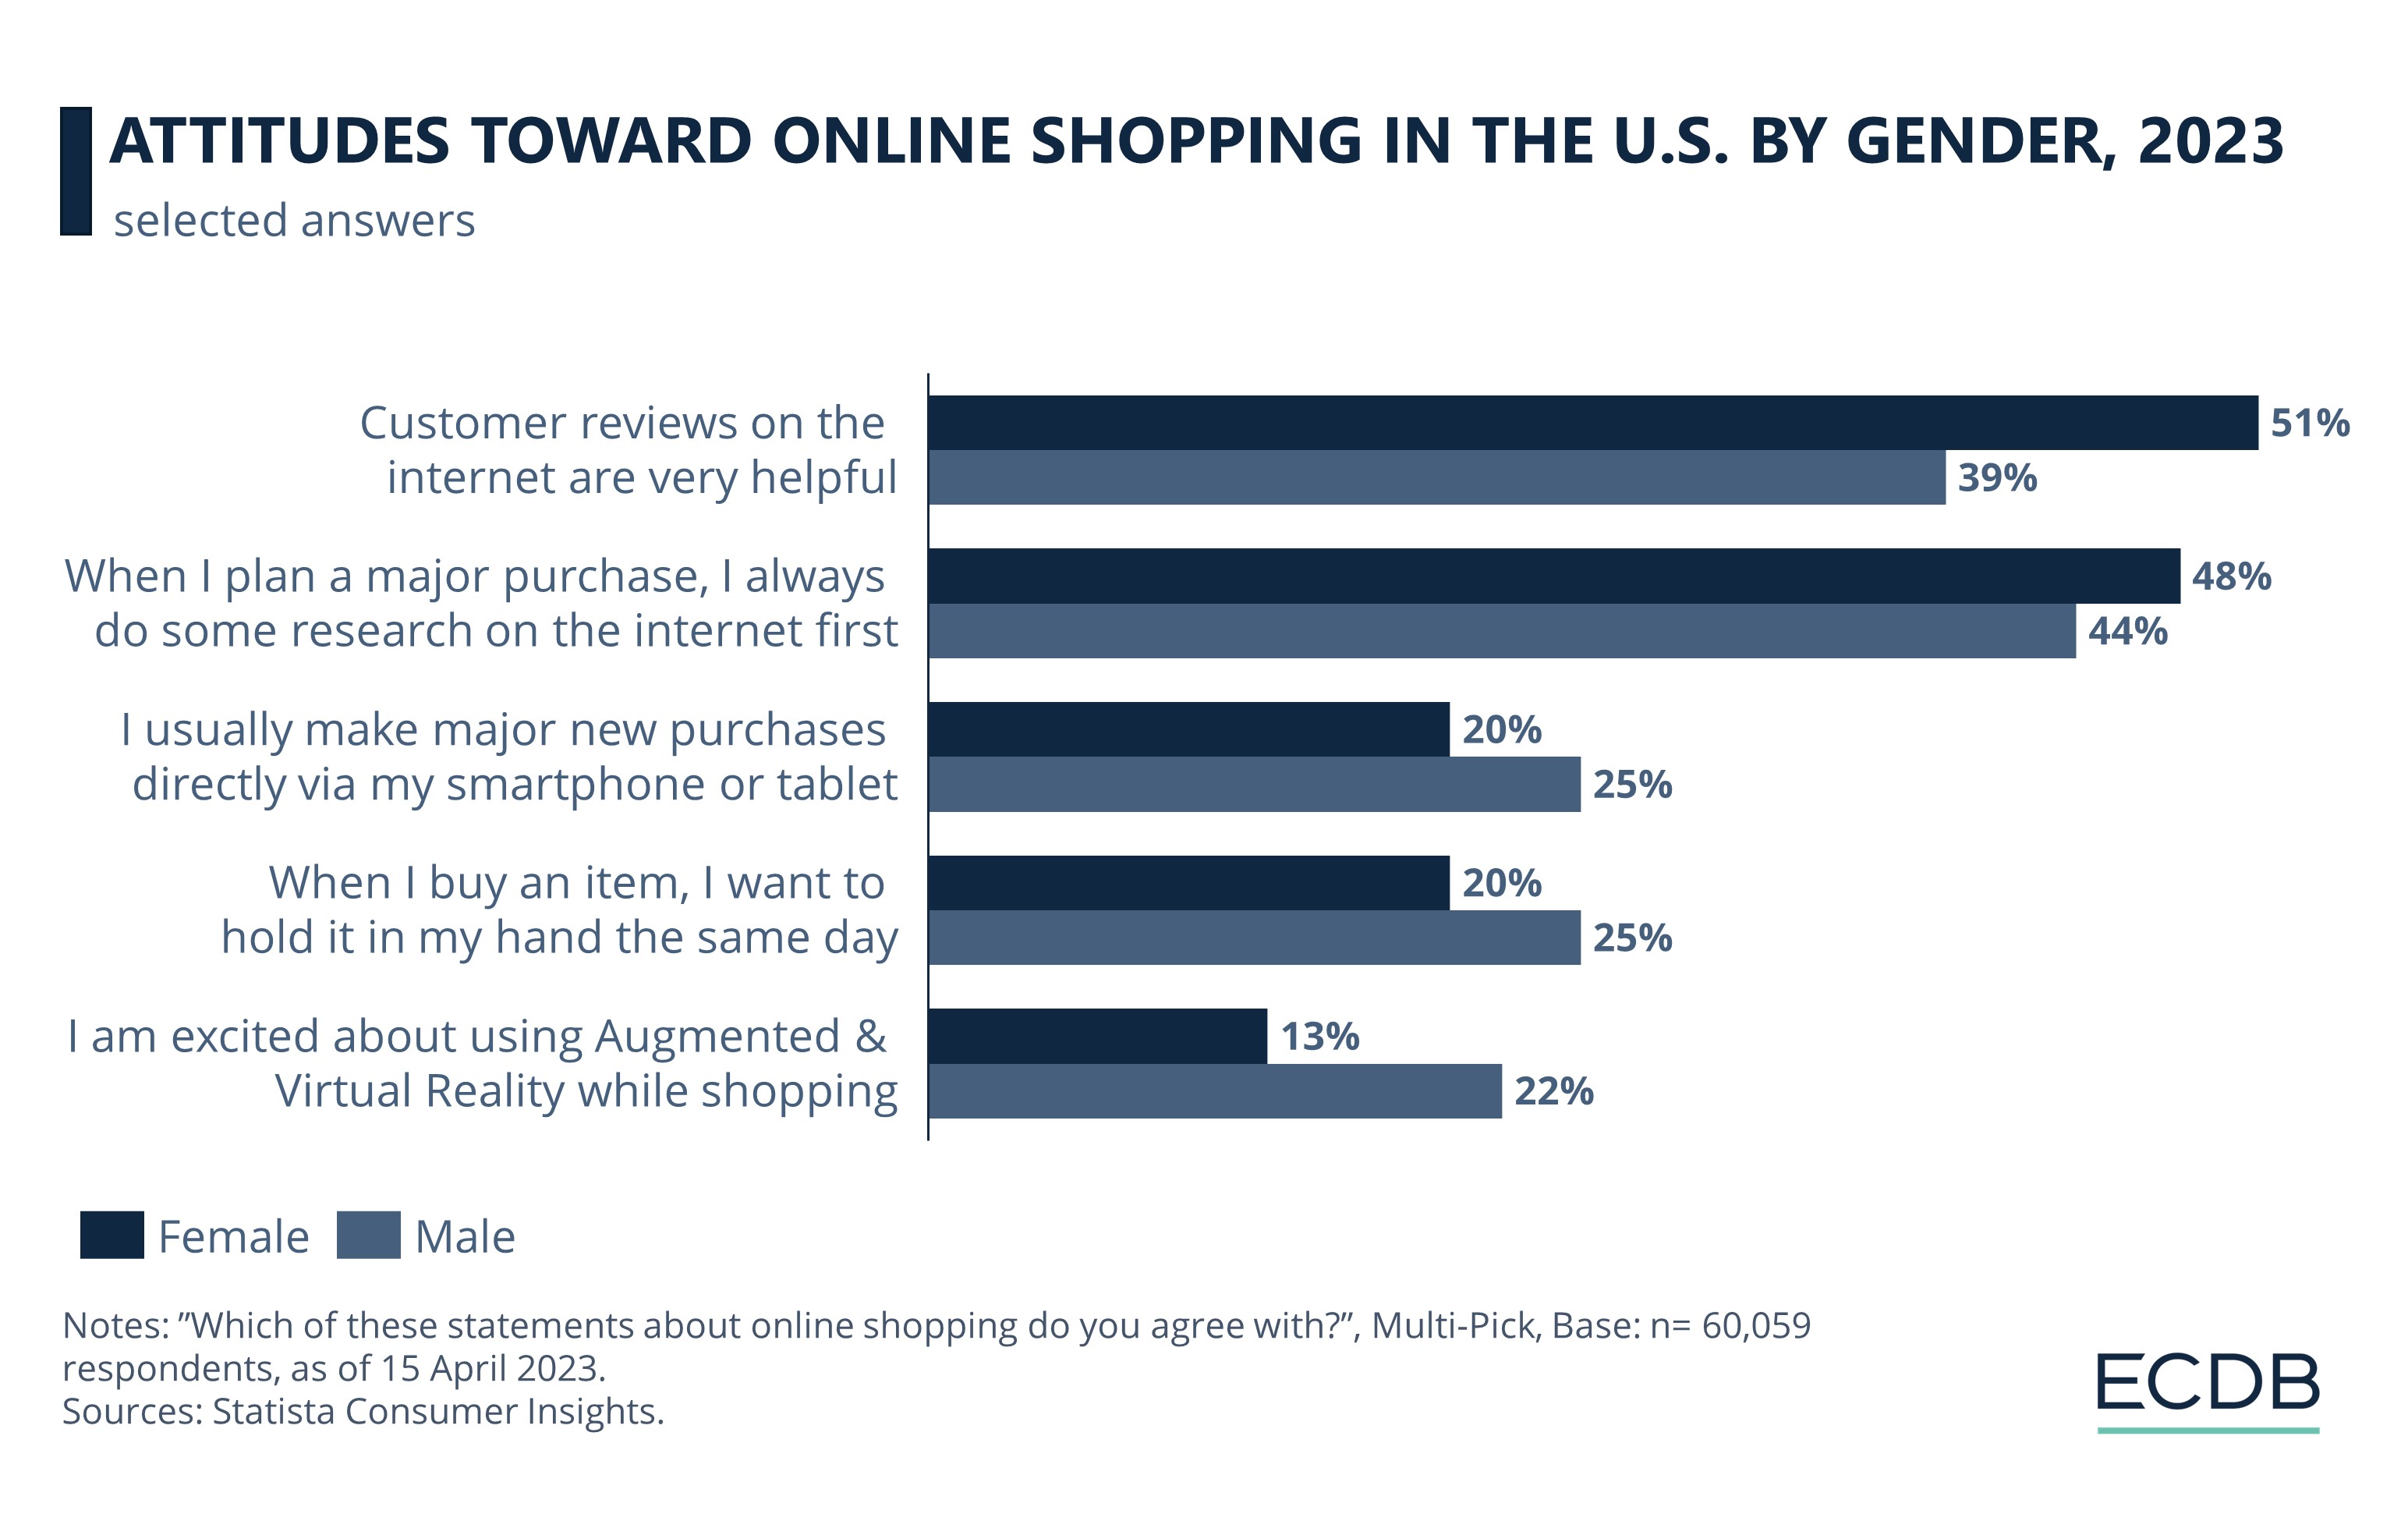 Attitudes Toward Online Shopping In The U.S. By Gender, 2023